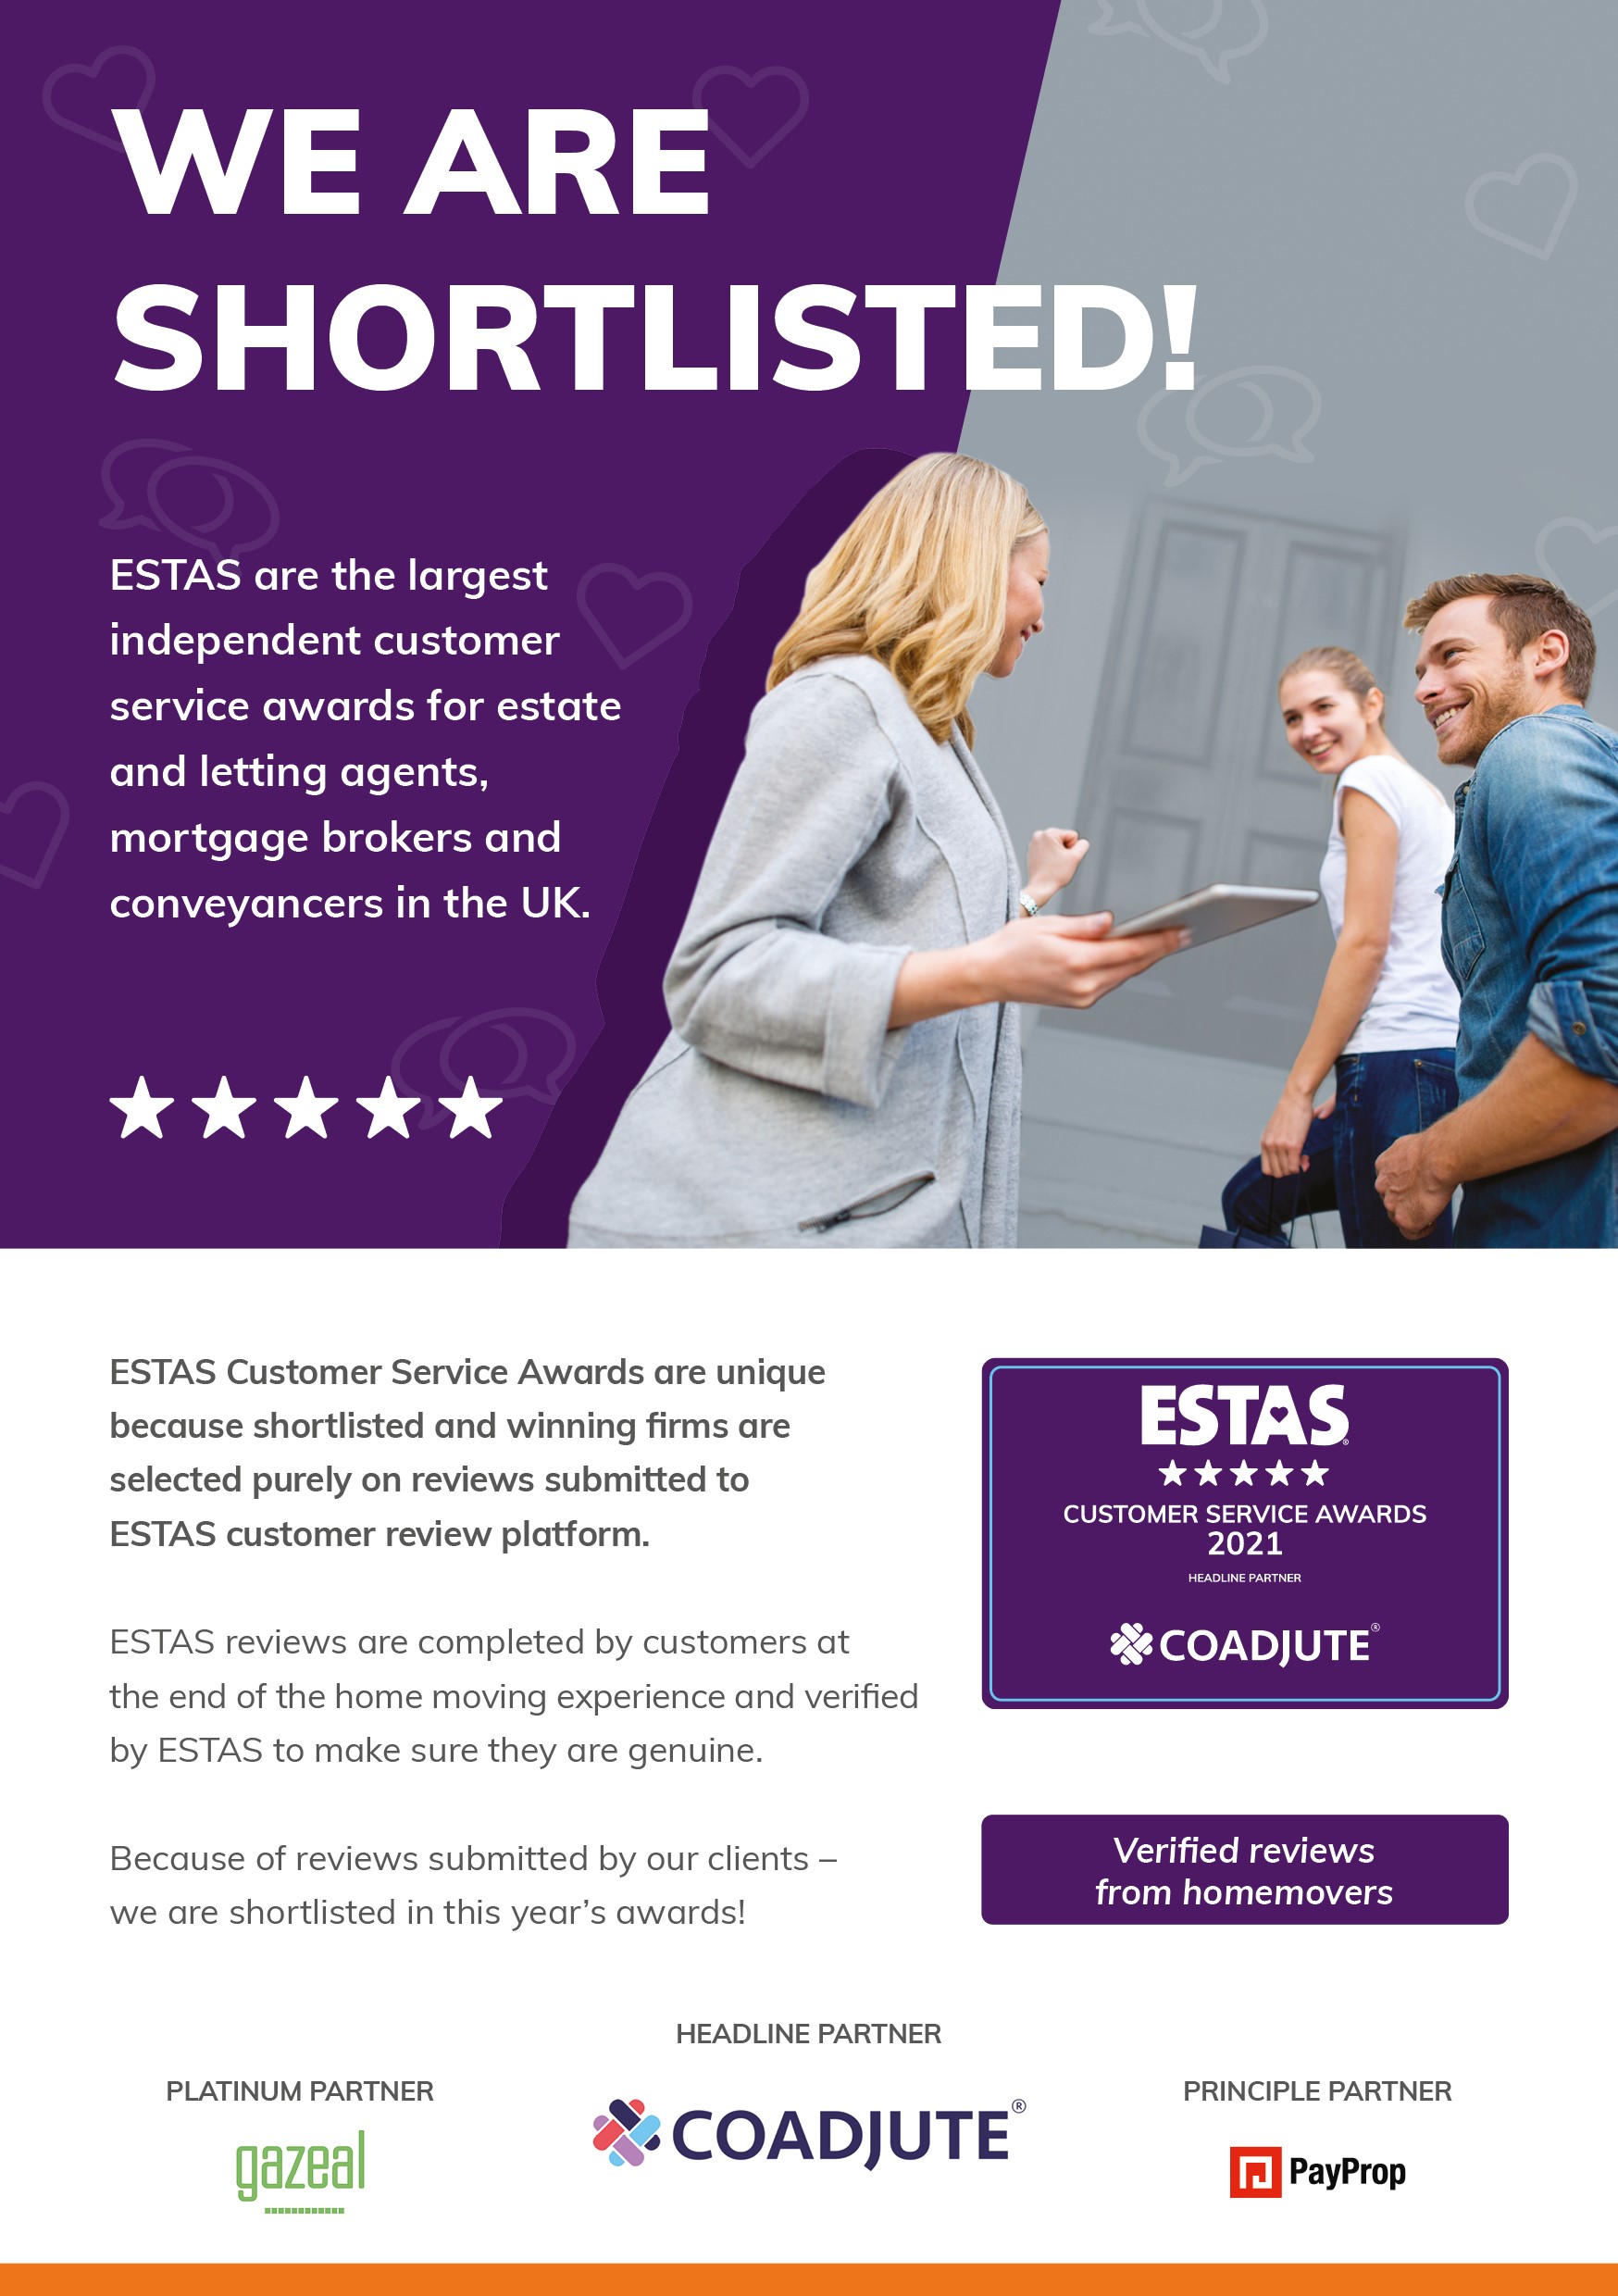 We Are Shortlisted A5 Flyer 2021